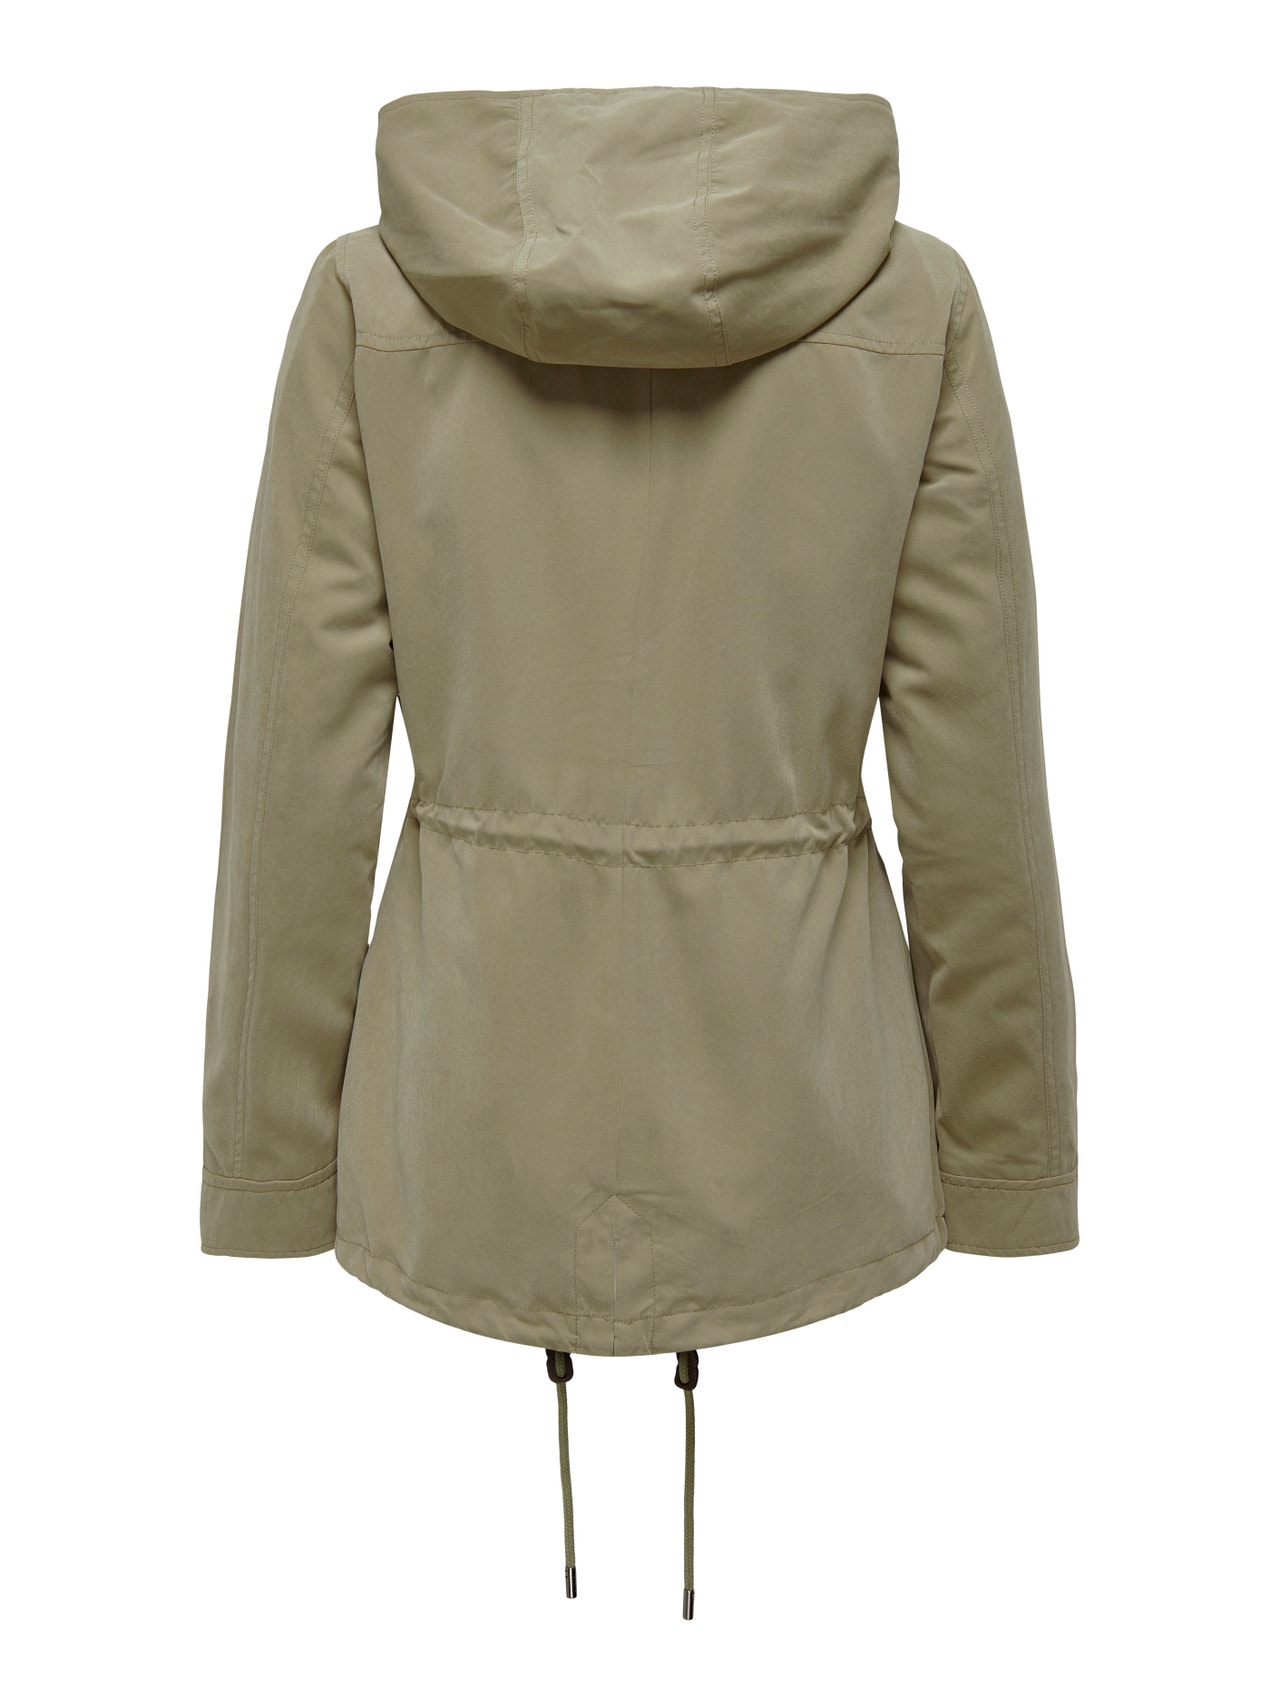 ONLY Solid color parka -Mermaid - 15293592